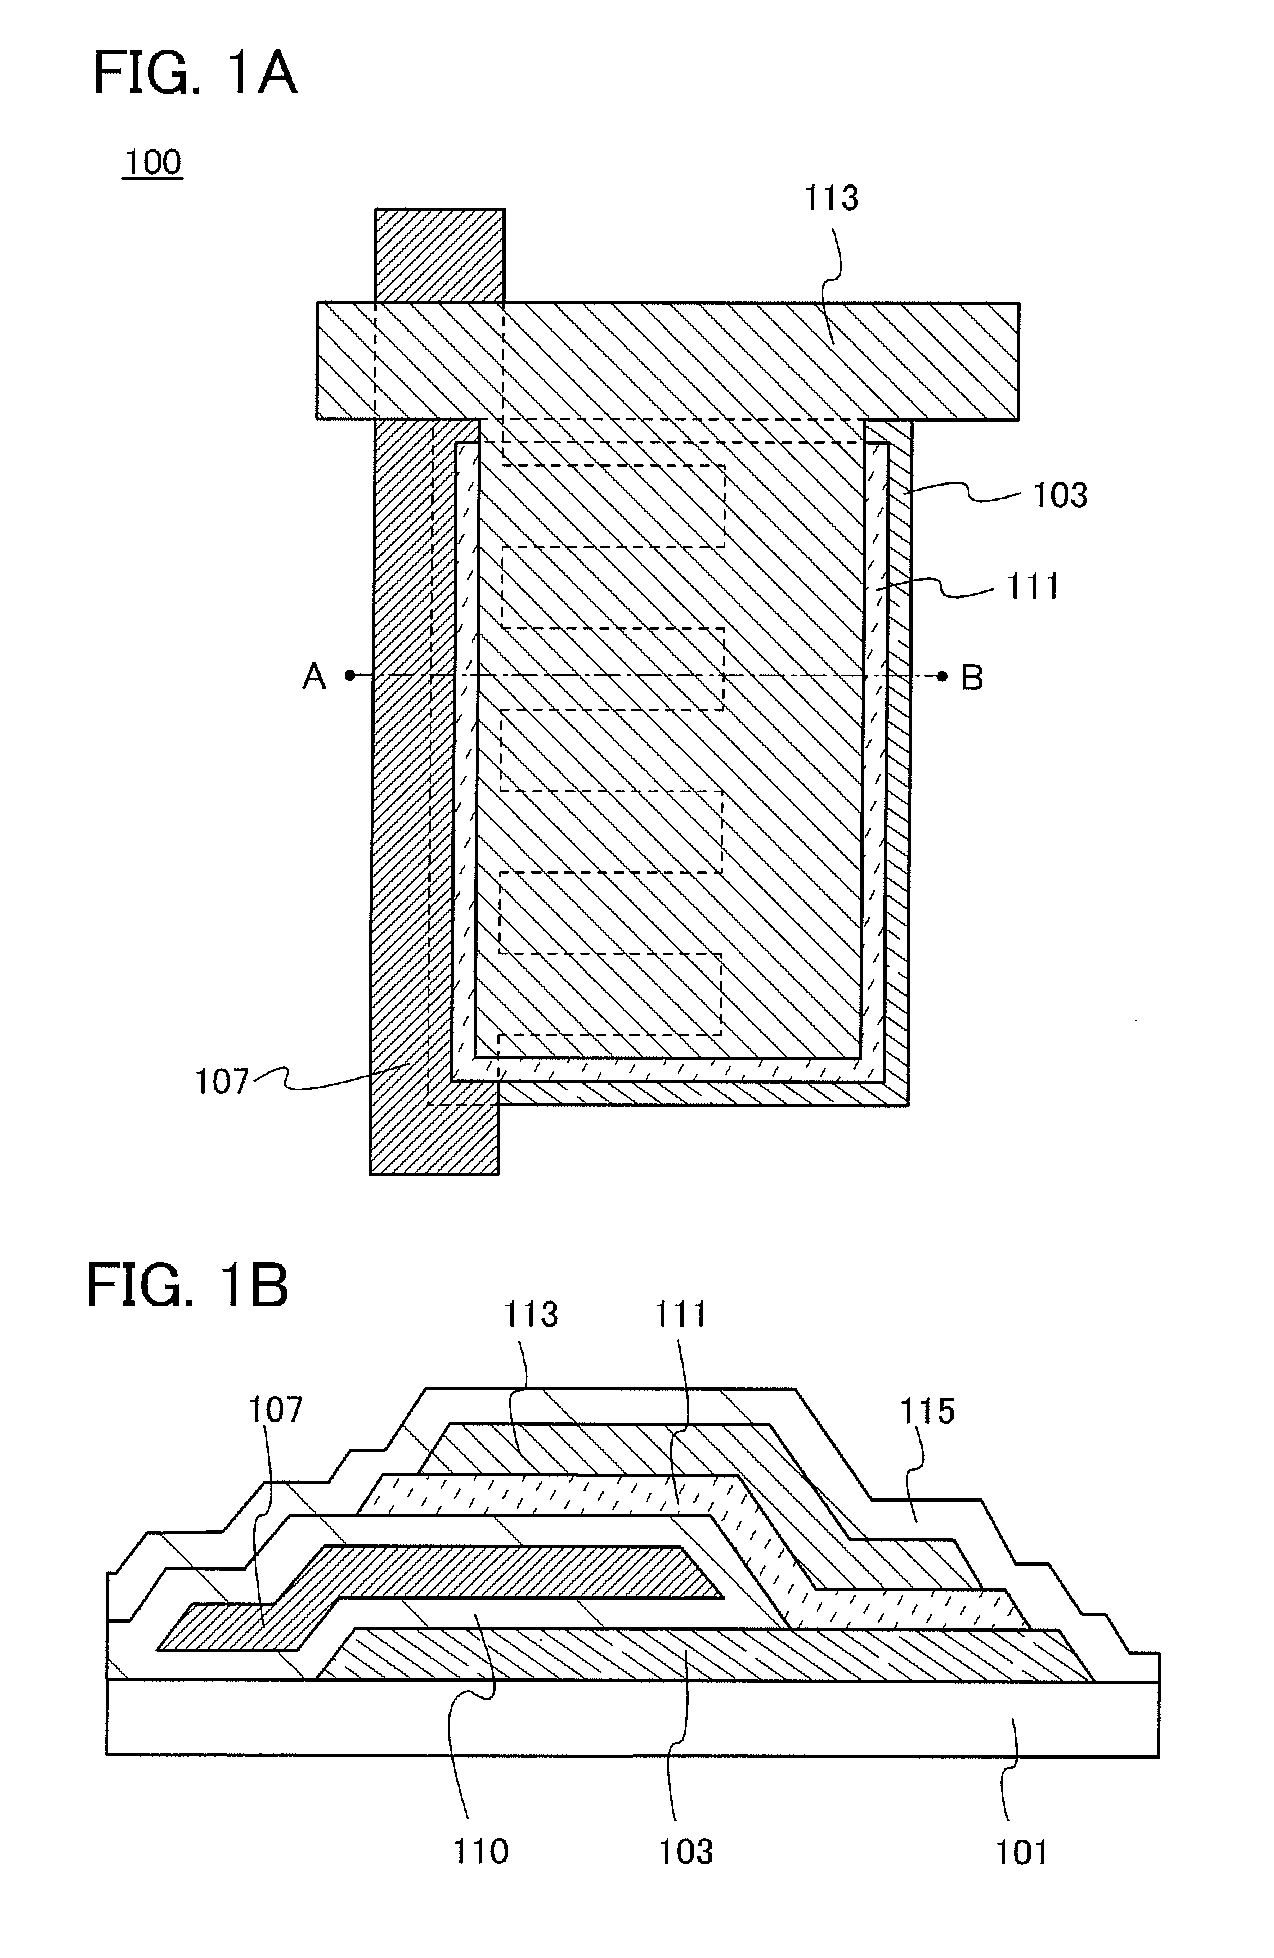 Transistor with an oxide semiconductor layer